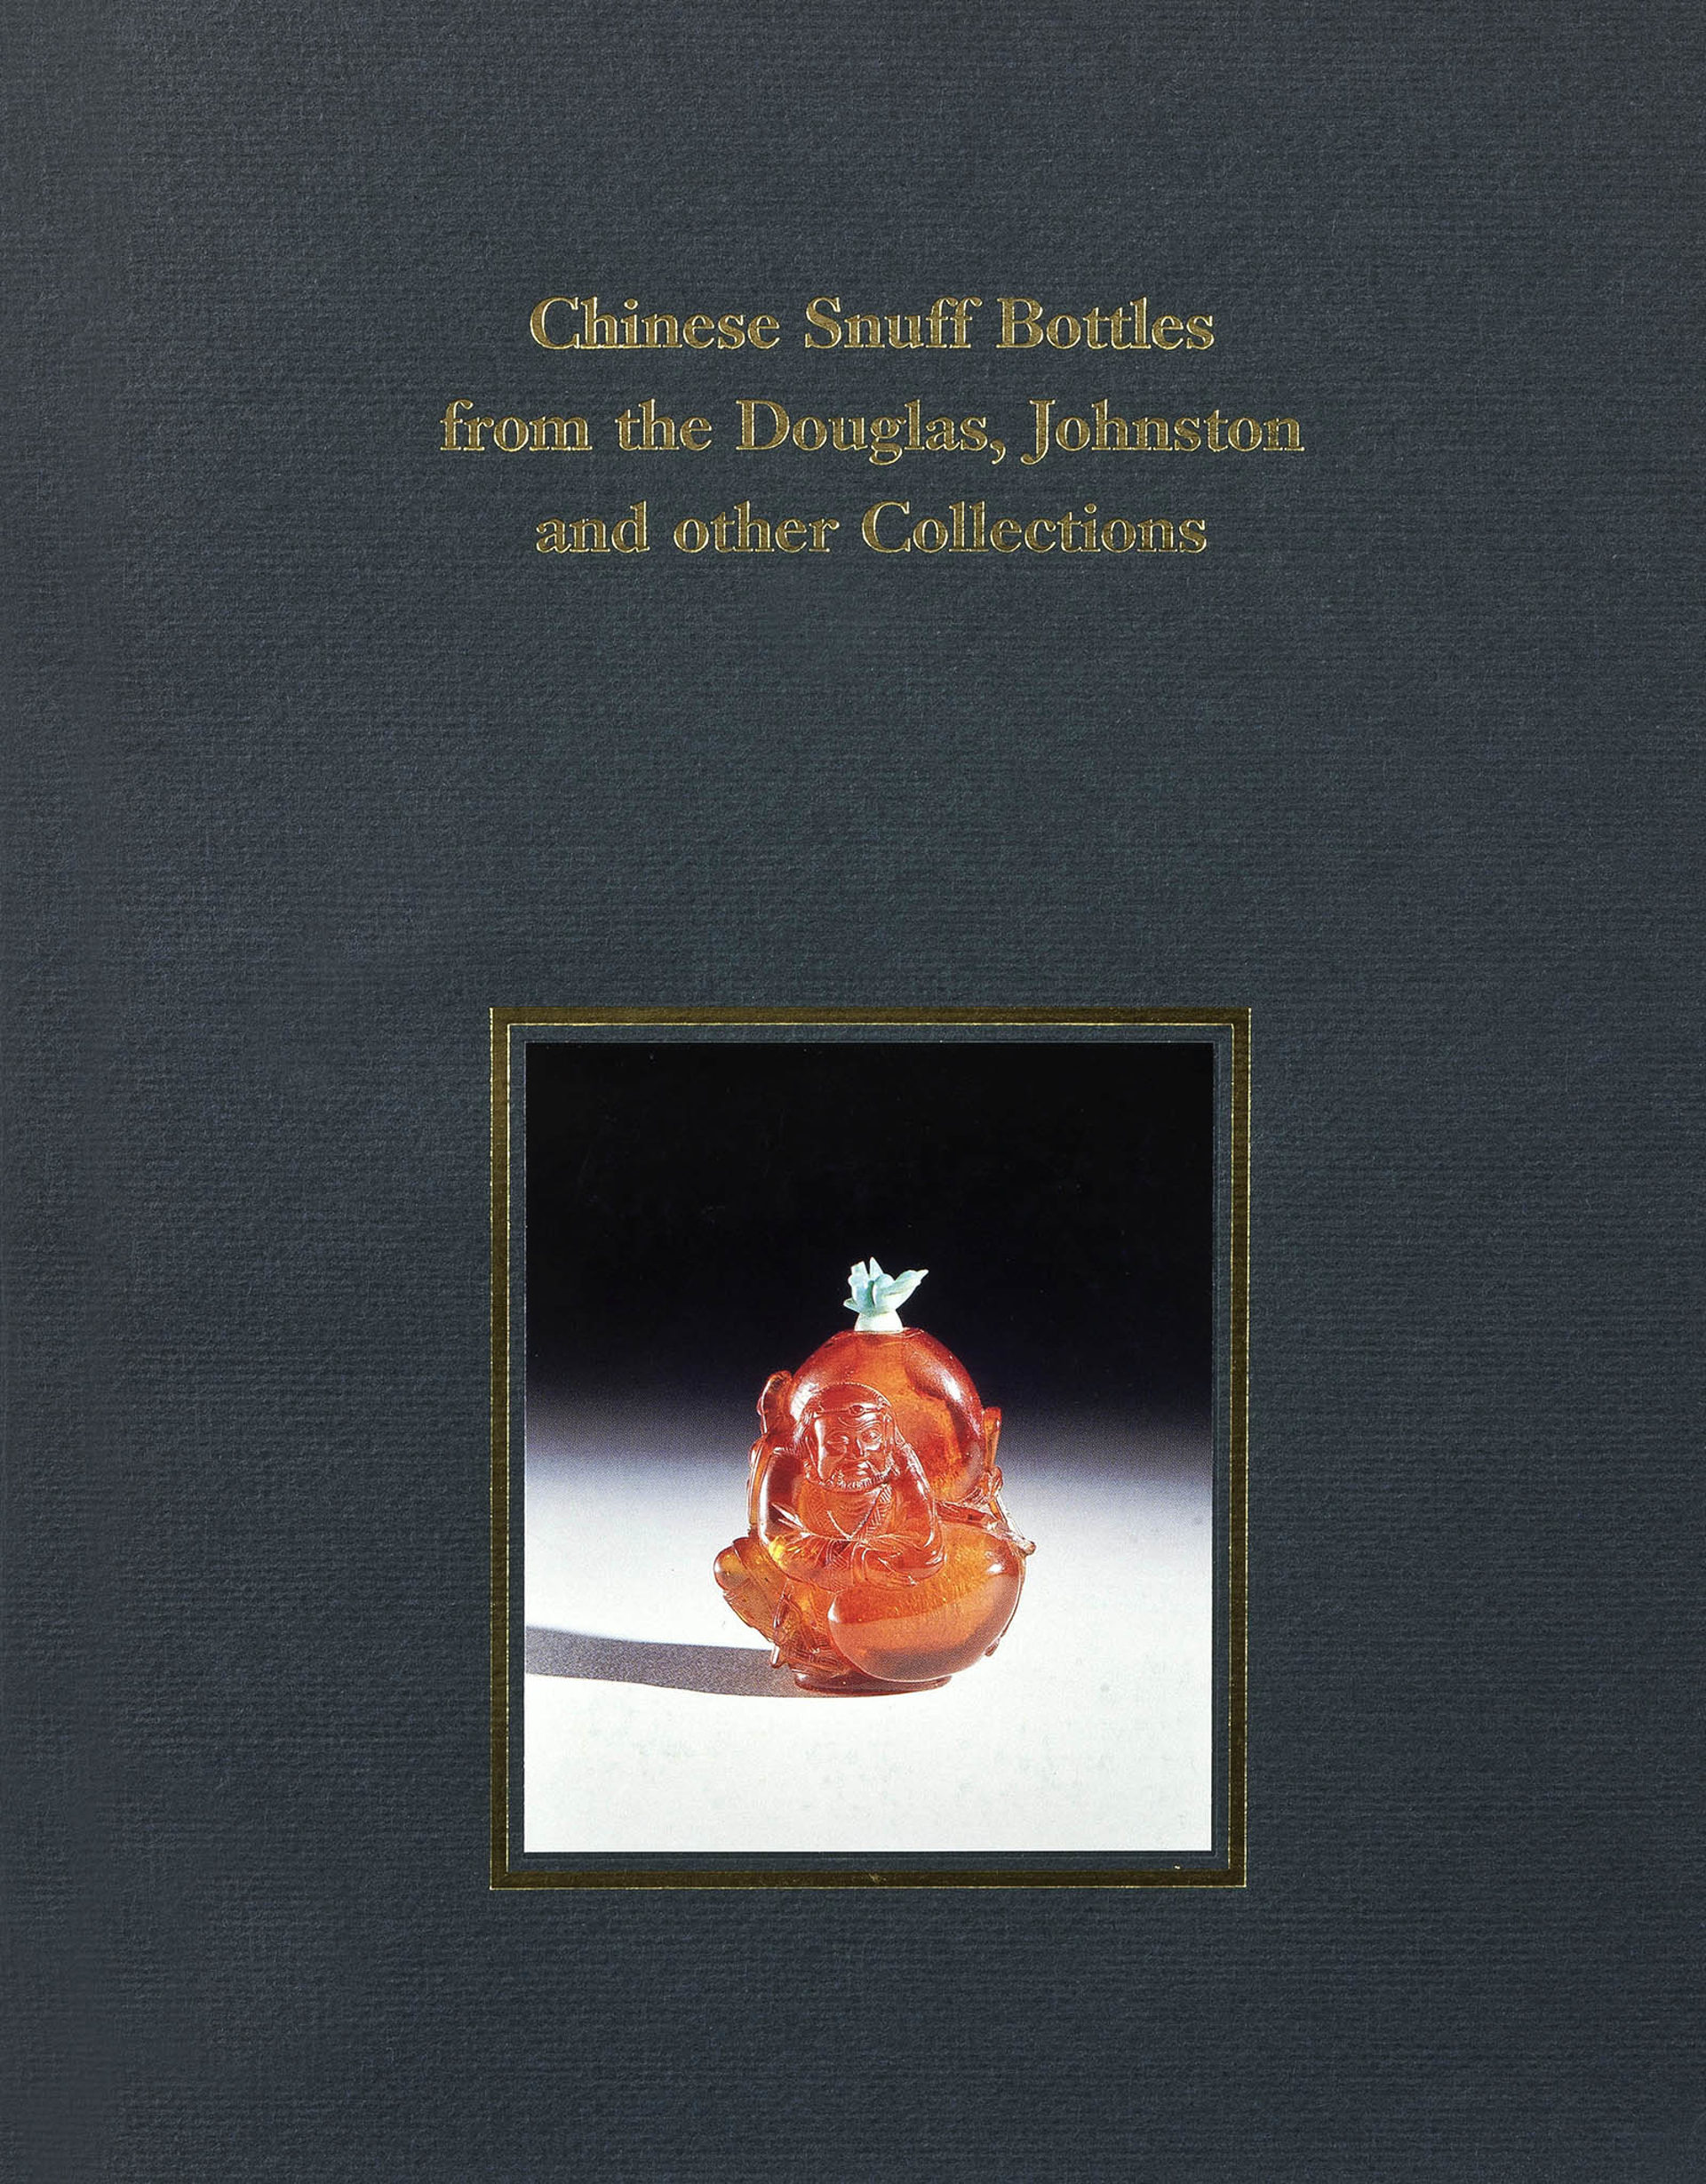 Chinese Snuff Bottles from the Douglas, Johnston and other Collections (out of print) by Catalog 09